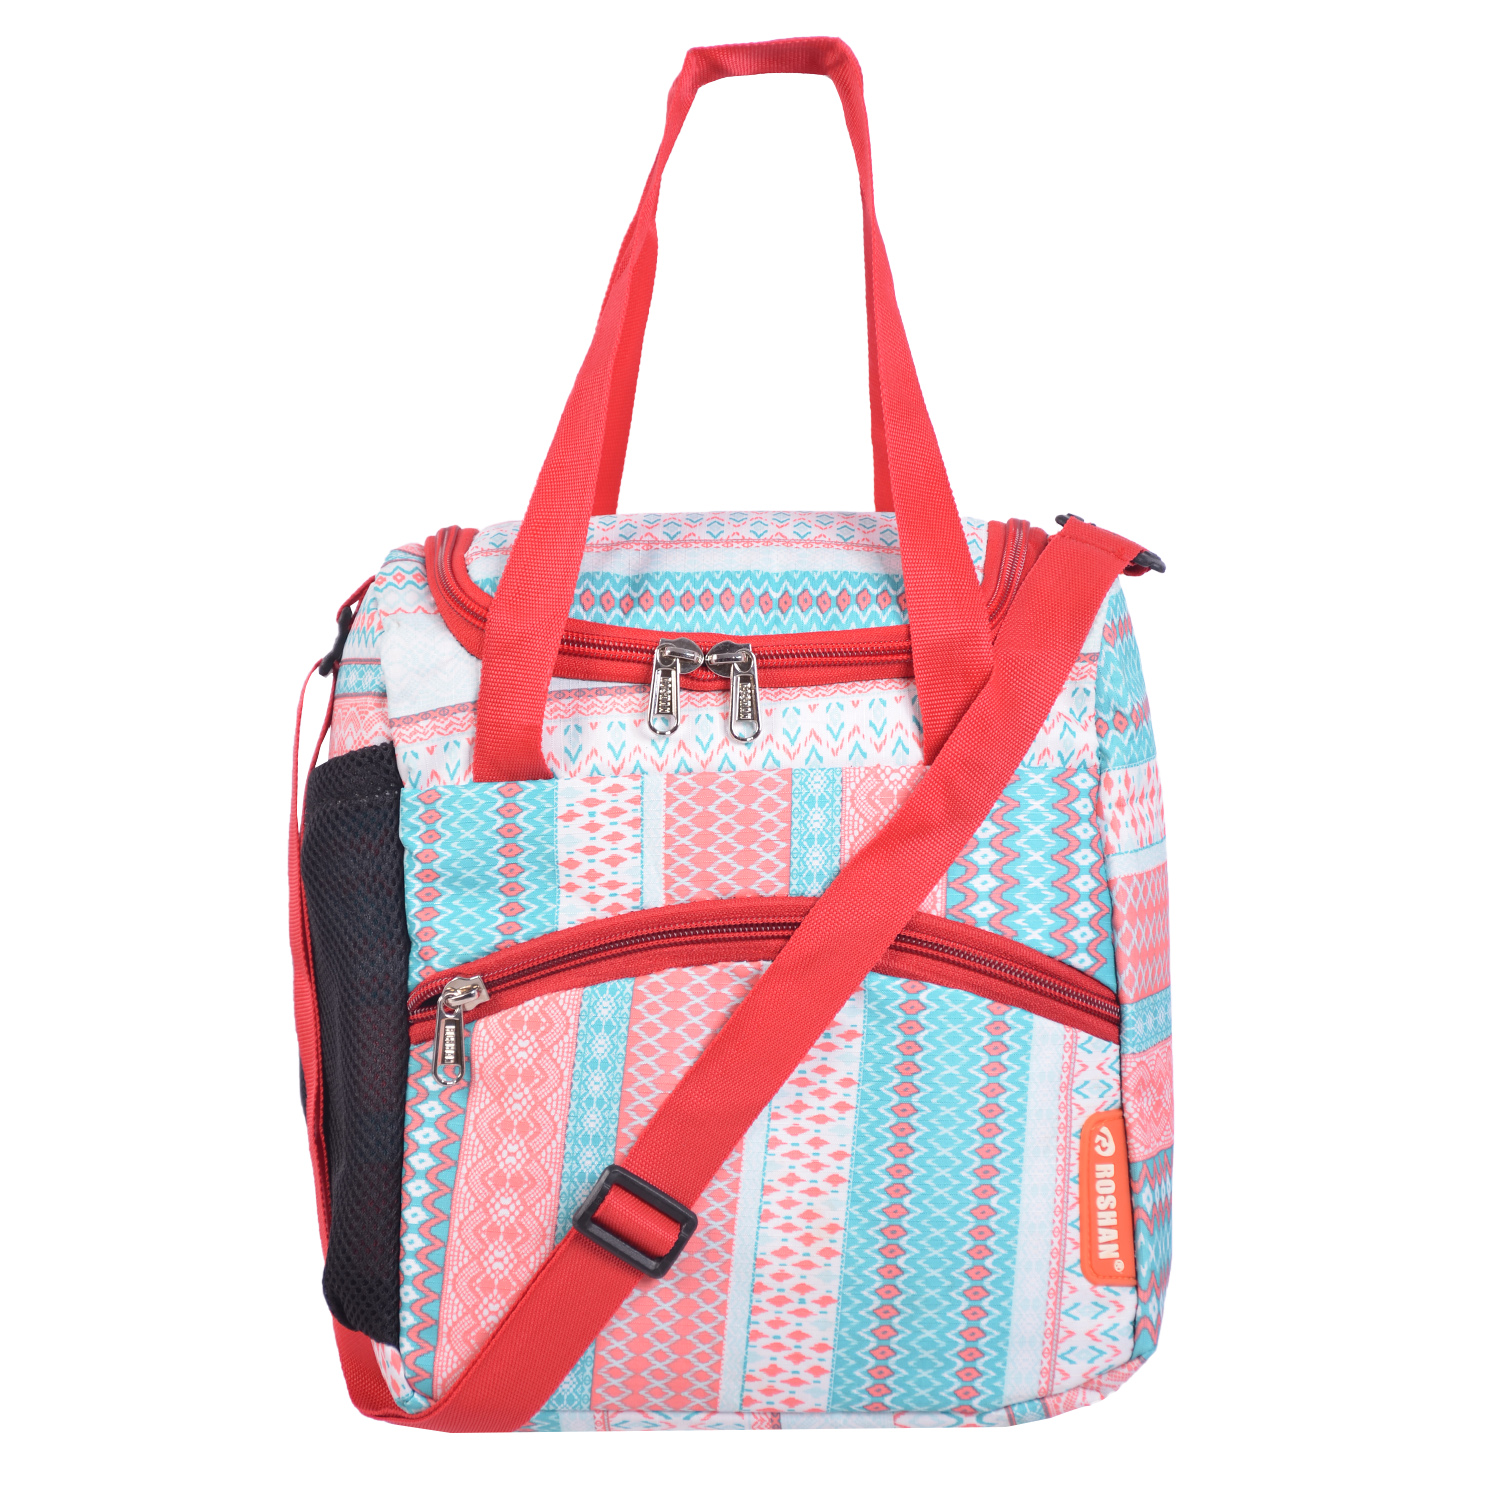 Buy Lunch Bags Online at Low Prices - Roshan Bags